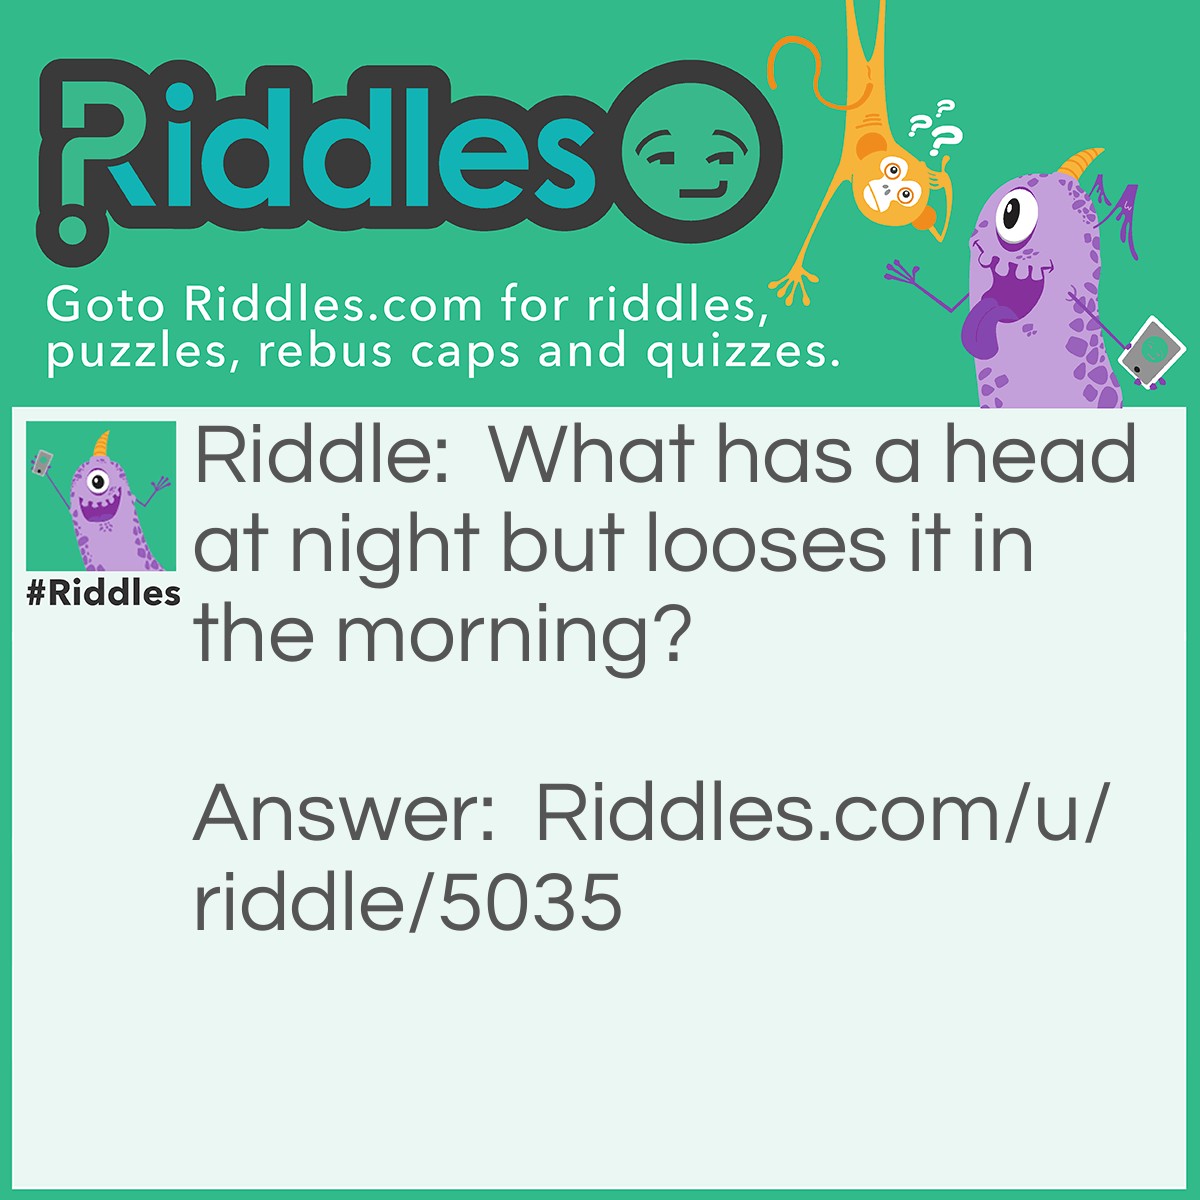 Riddle: What has a head at night but looses it in the morning? Answer: A pillow.